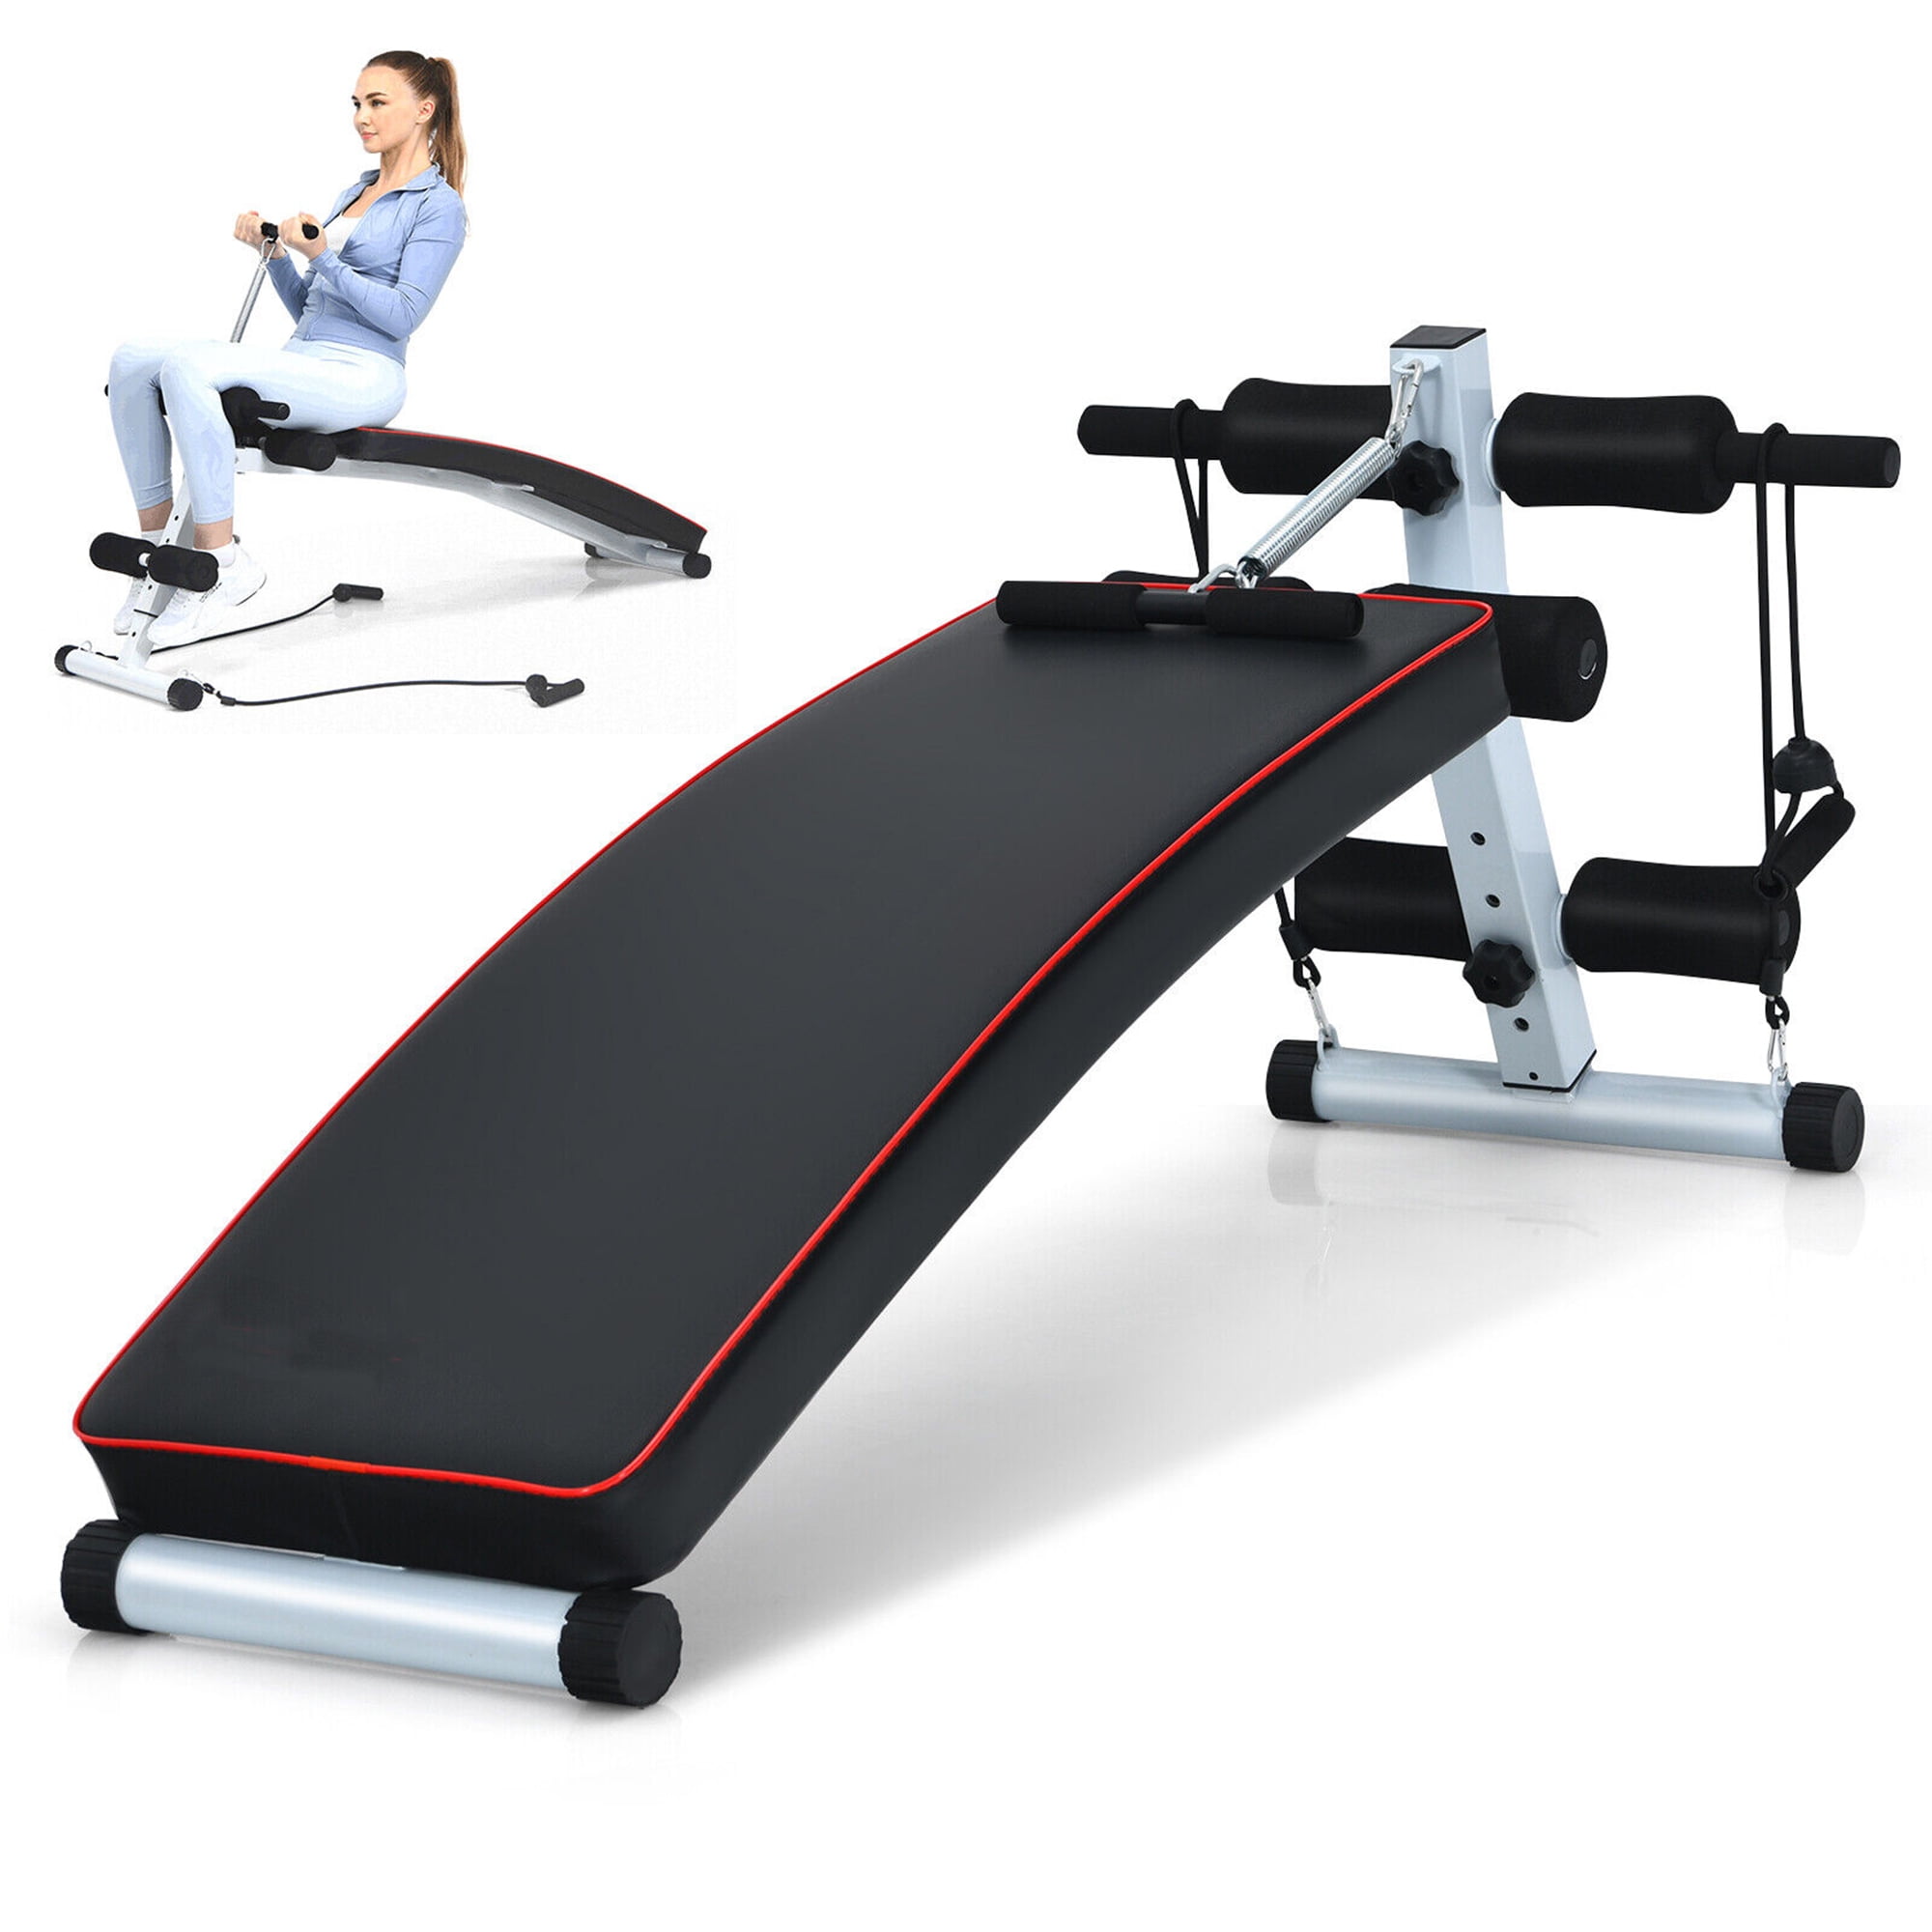 Details about   Sit Up Bench Decline Abdominal Fitness Home Cardio Gym Exercise Workout Core USA 